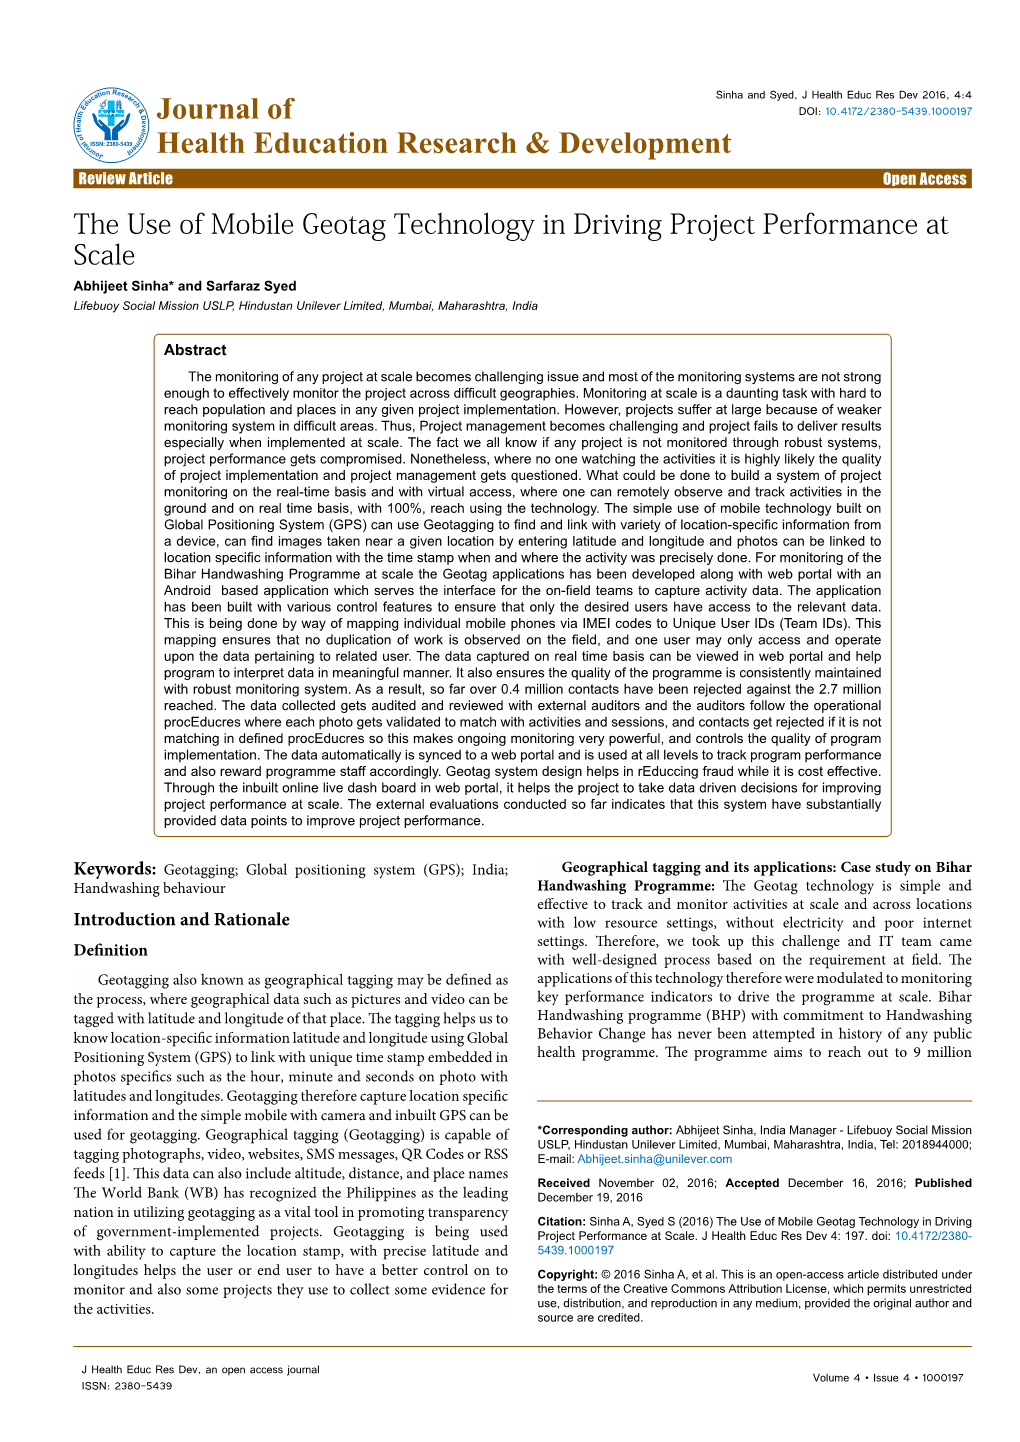 The Use of Mobile Geotag Technology in Driving Project Performance At